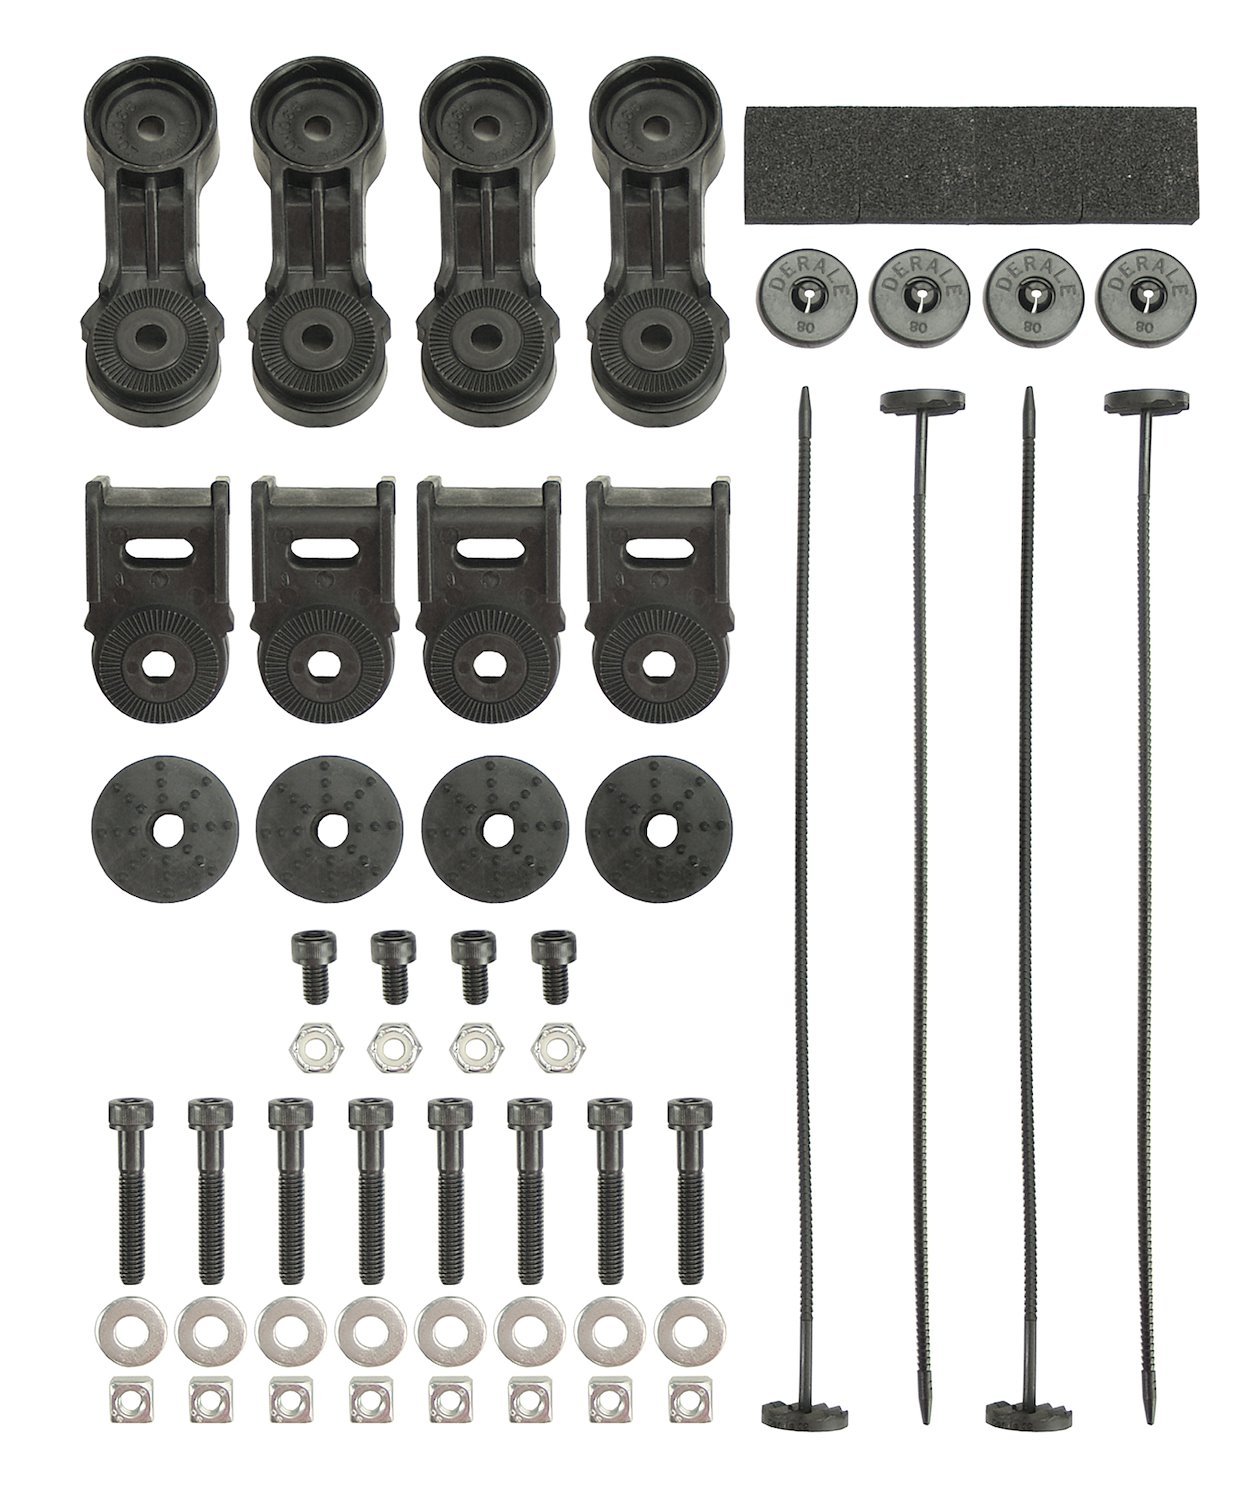 Single to Dual Fan Mounting Kit Includes: Ratcheting